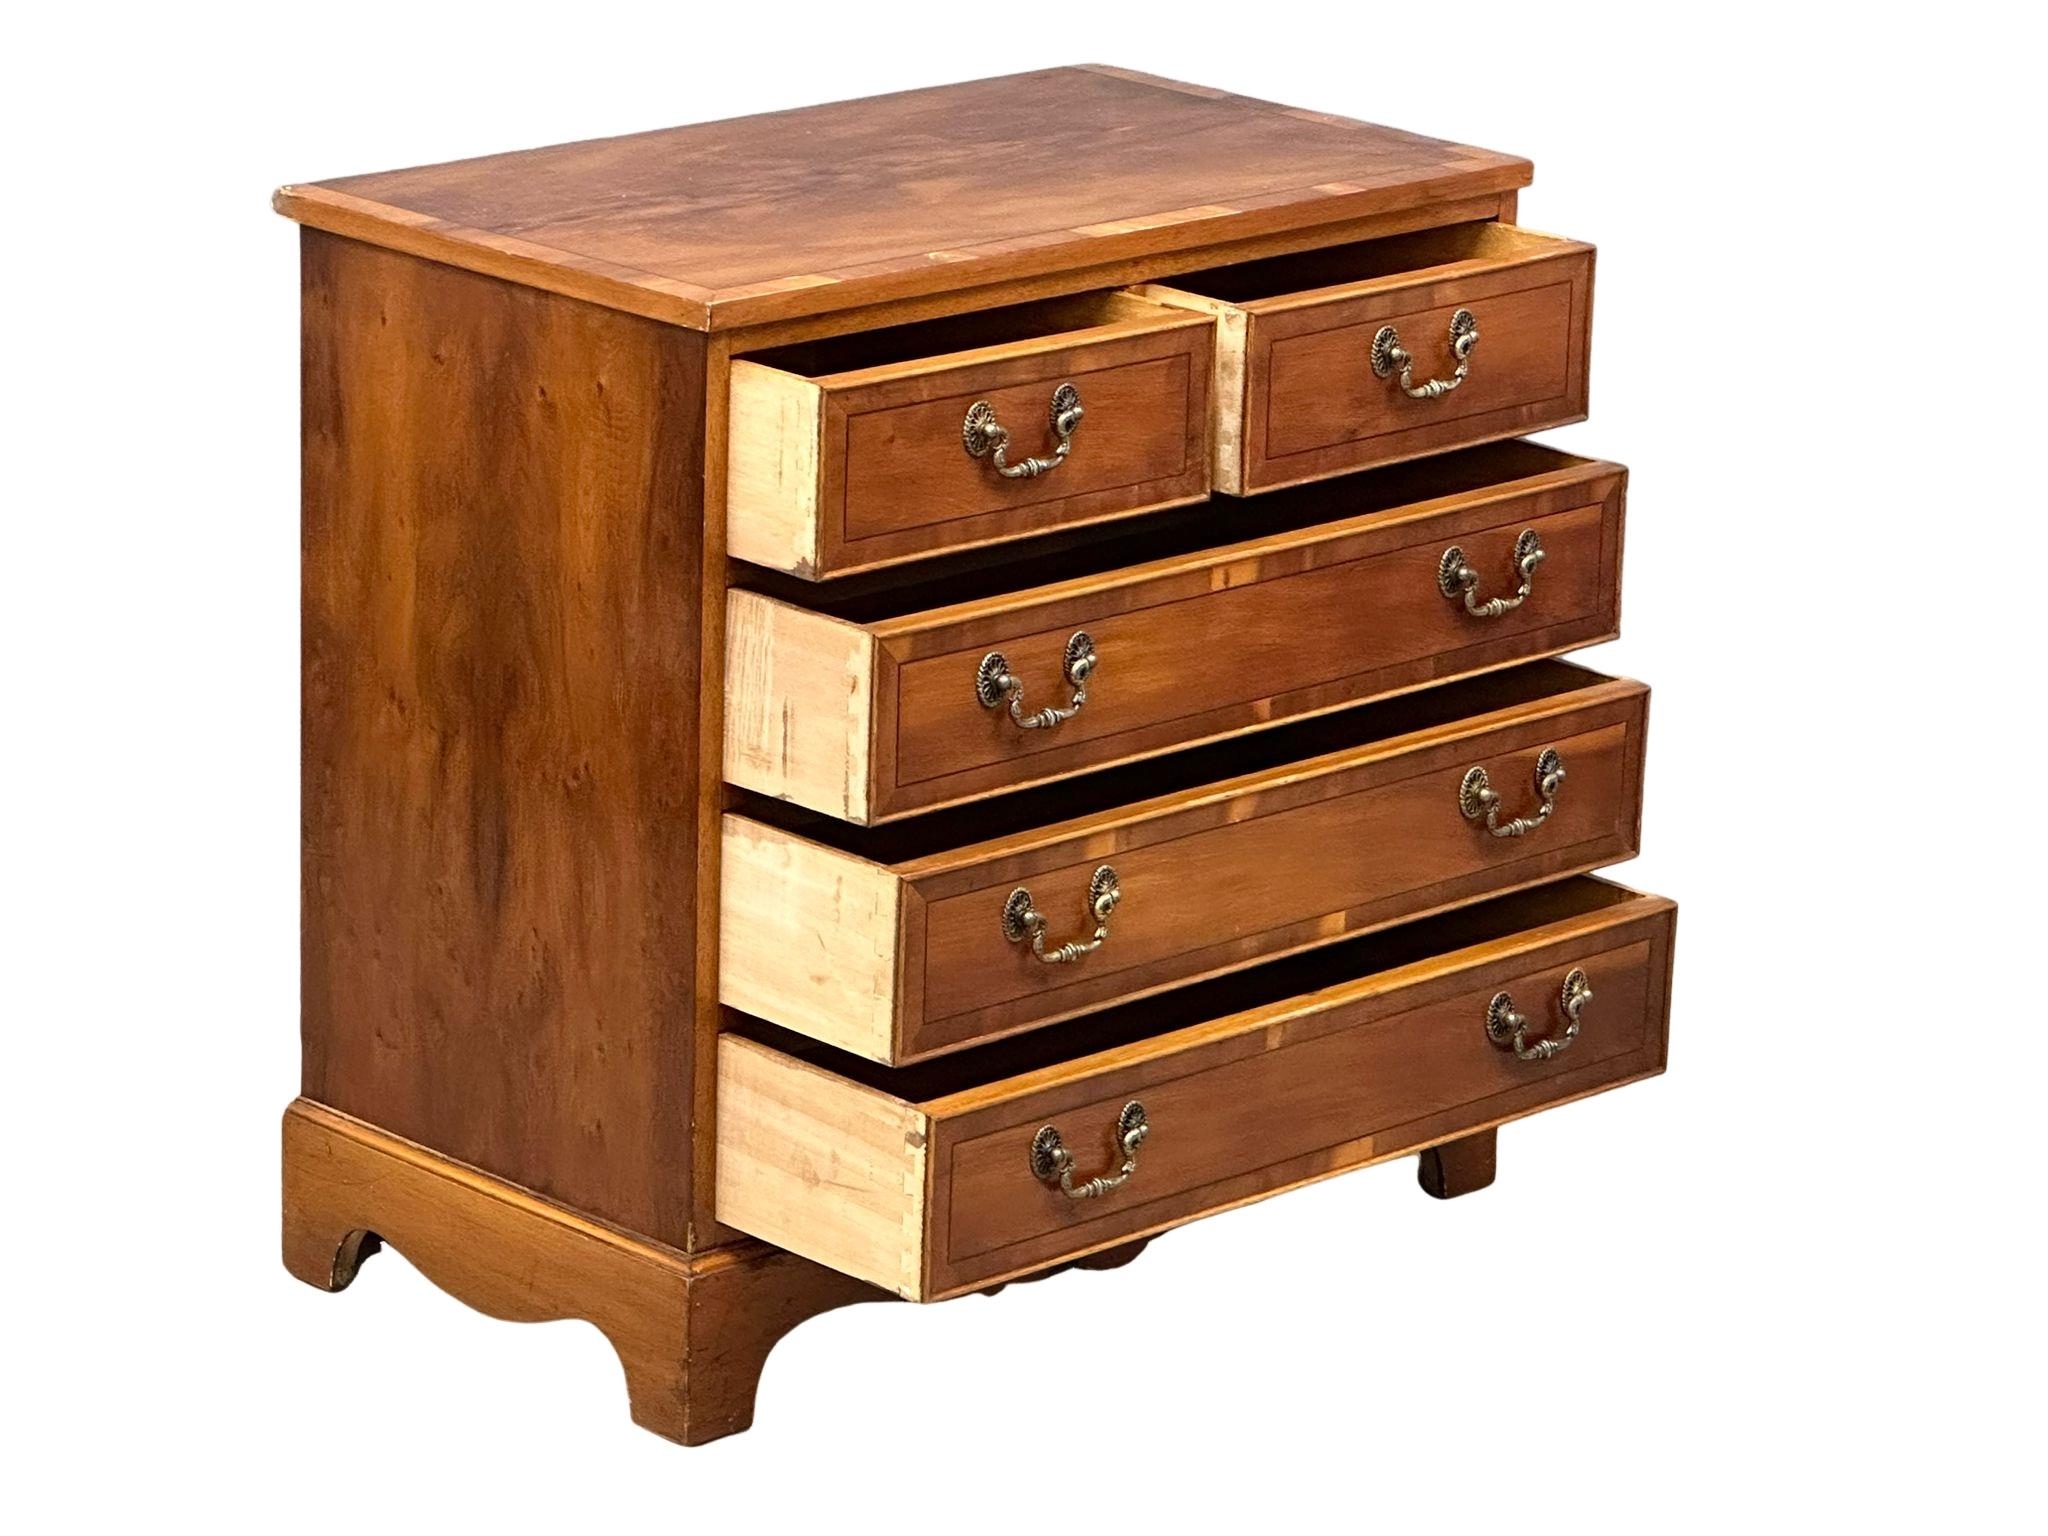 A George III style Inlaid yew wood chest of drawers, 75cm x 42cm x 74cm - Image 4 of 7